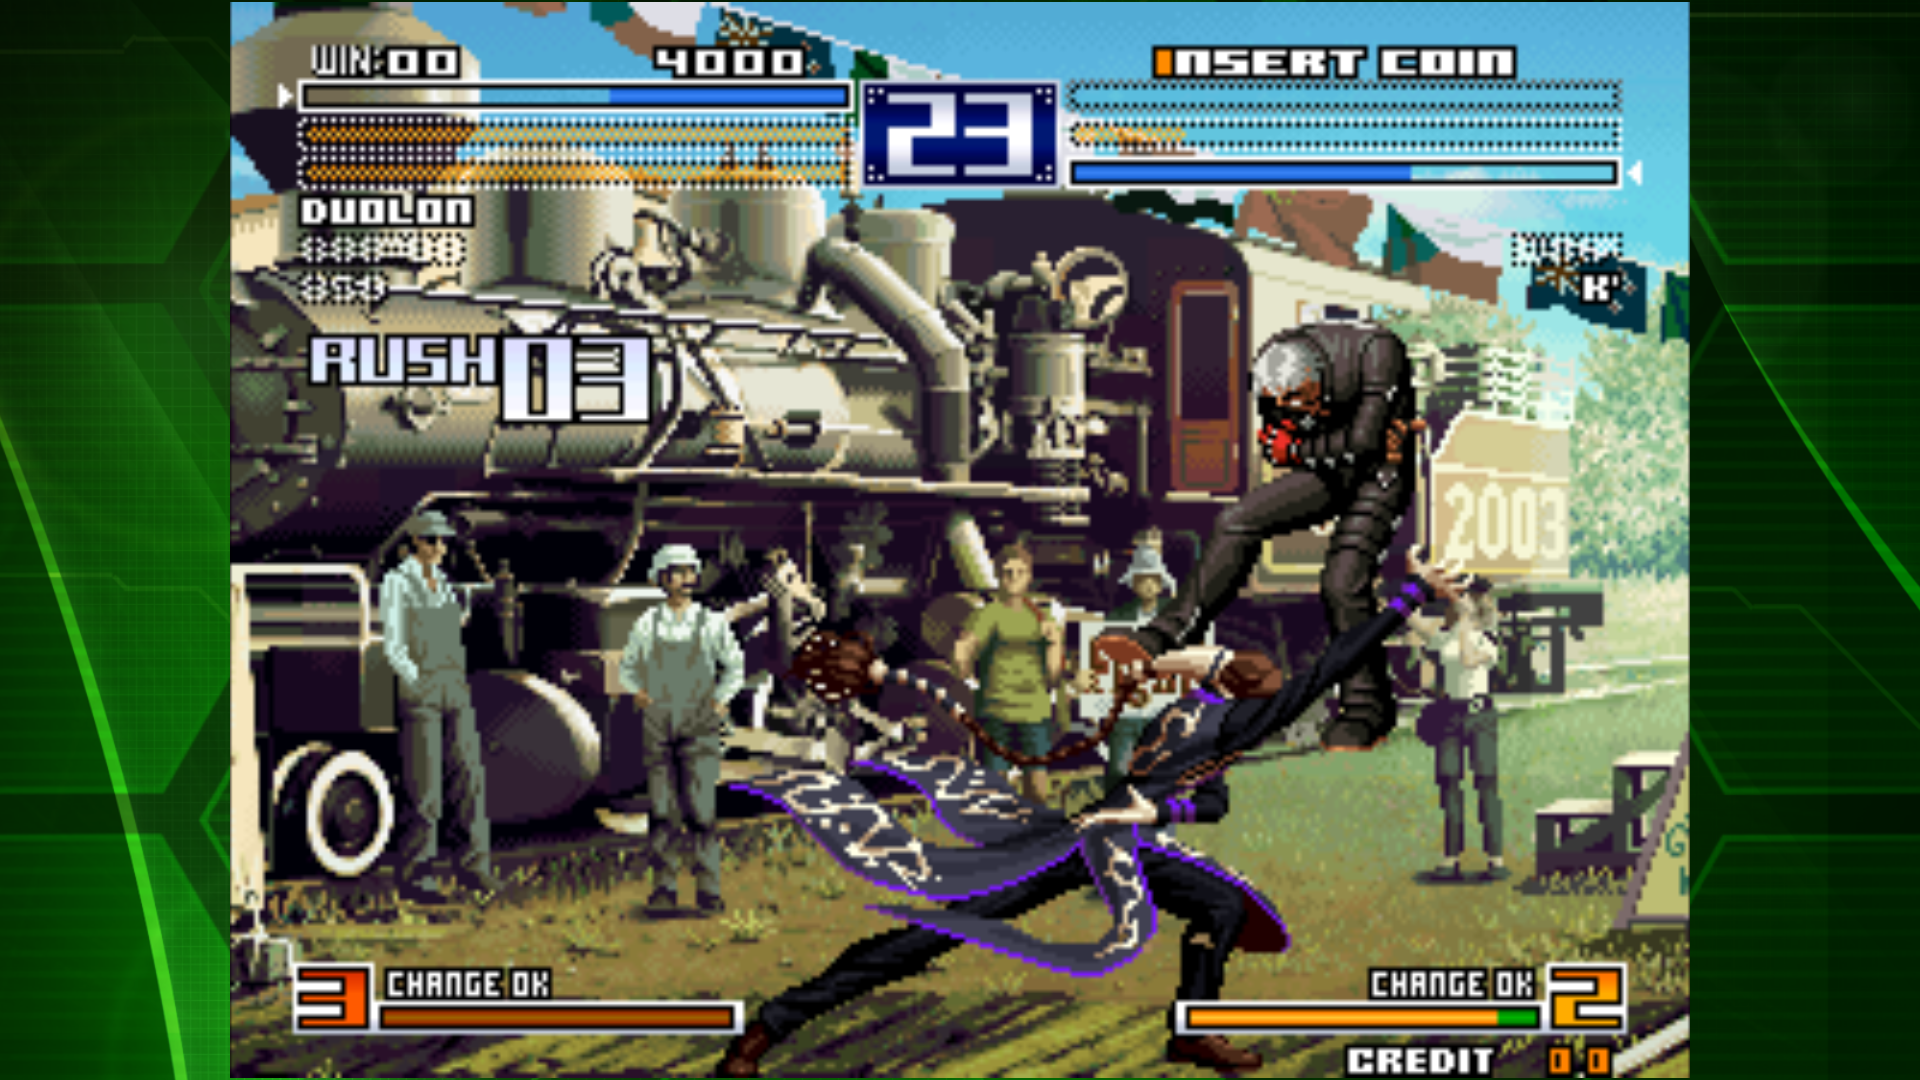 Classic Fighting Game ‘The King of Fighters 2003’ ACA NeoGeo From SNK and Hamster Is Out Now on iOS and Android